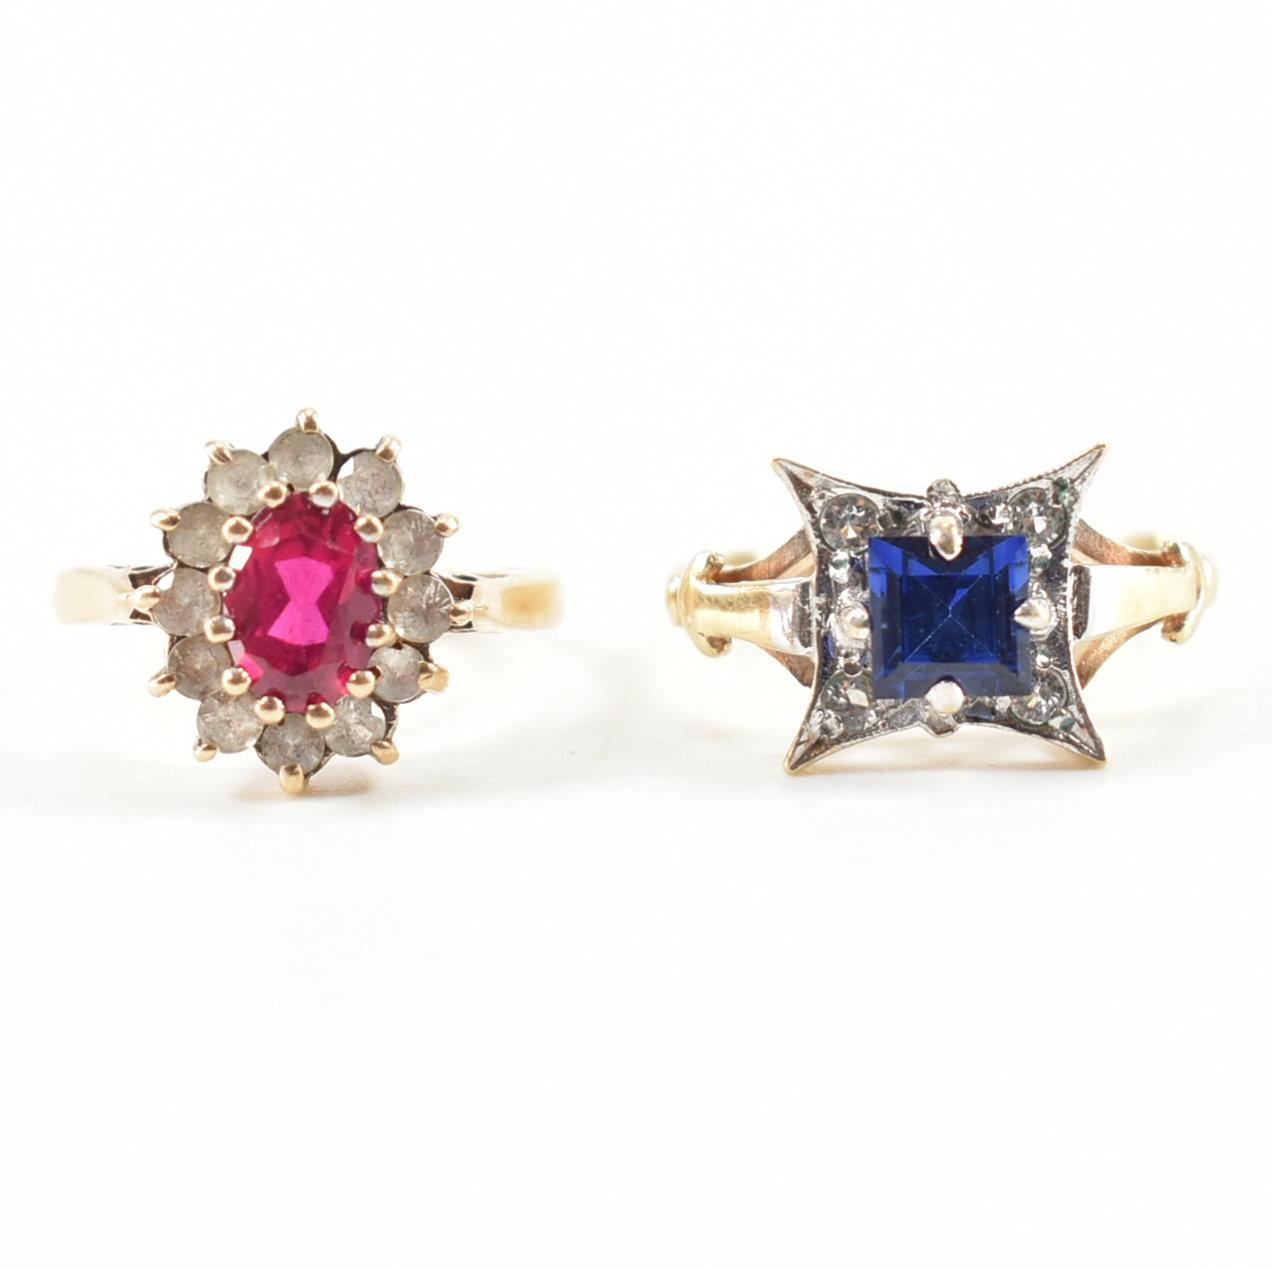 TWO HALLMARKED 9CT GOLD RINGS - SYNTHETIC RUBY & SYNTHETIC SAPPHIRE